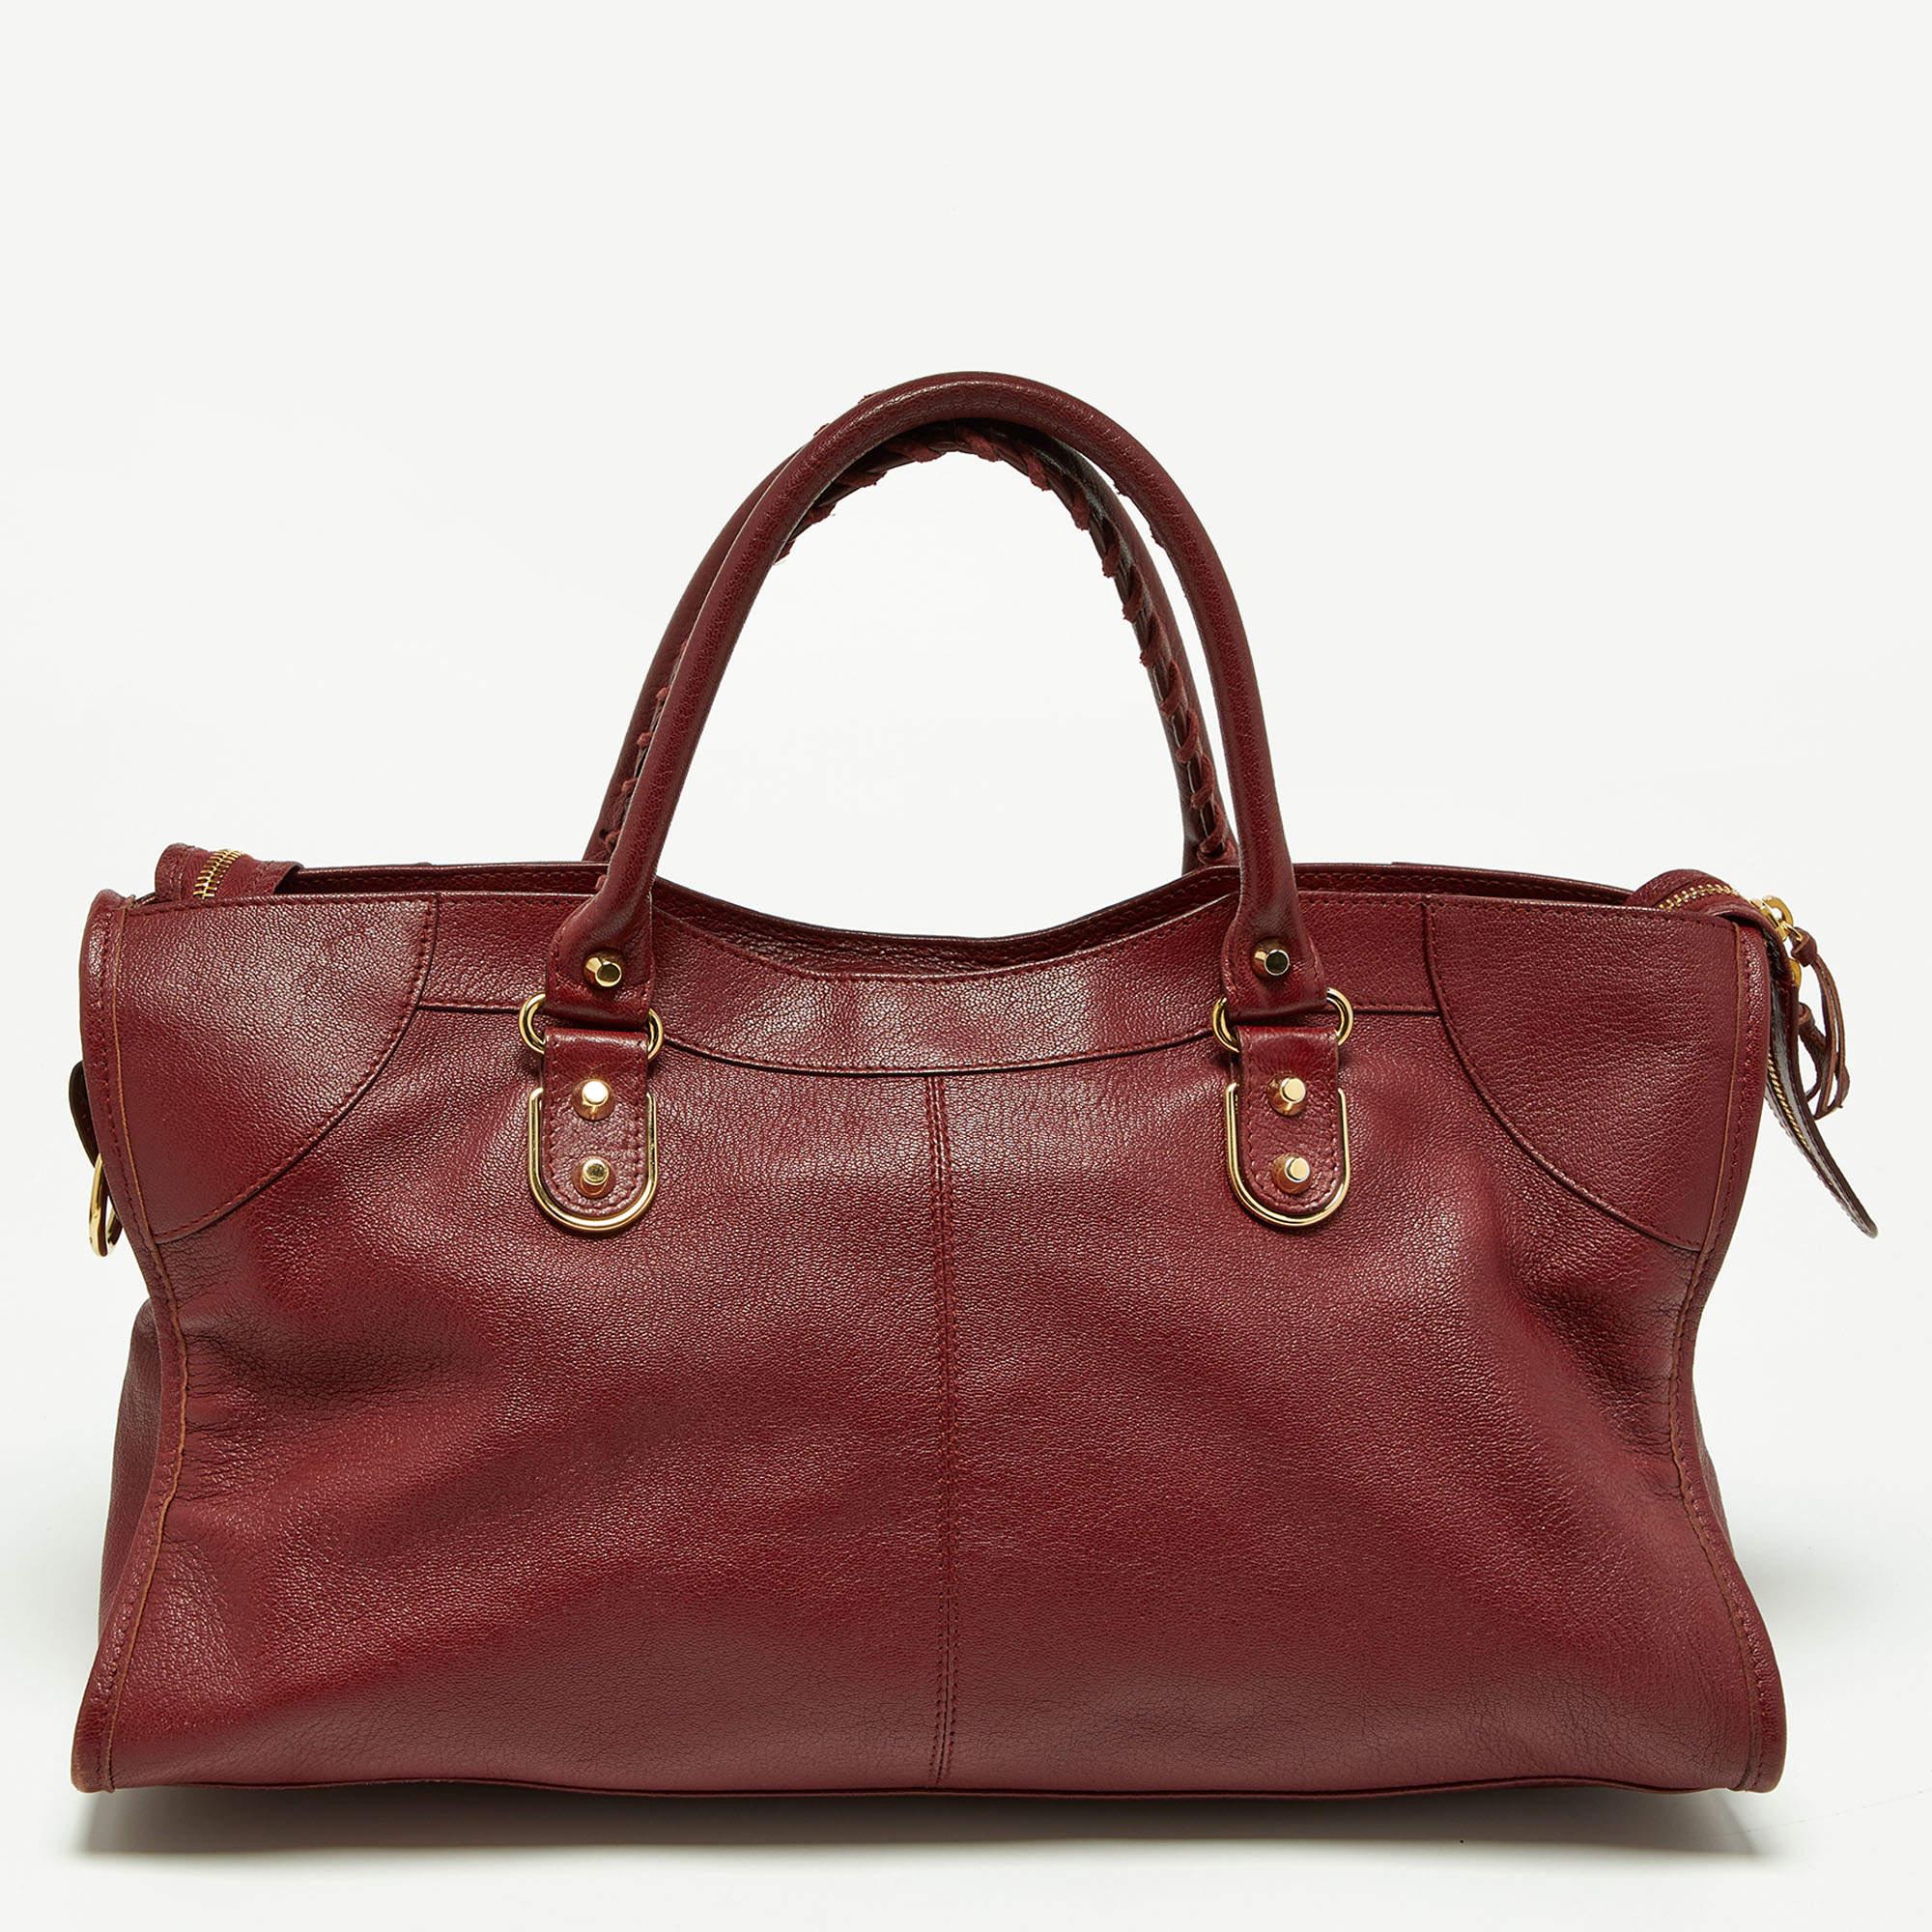 The burgundy exterior of this Balenciaga City bag is made chic and highly fashionable with gold-tone accents. Crafted from leather, it is equipped with a front zipper pocket and can be carried with dual handles or a shoulder strap. The fabric